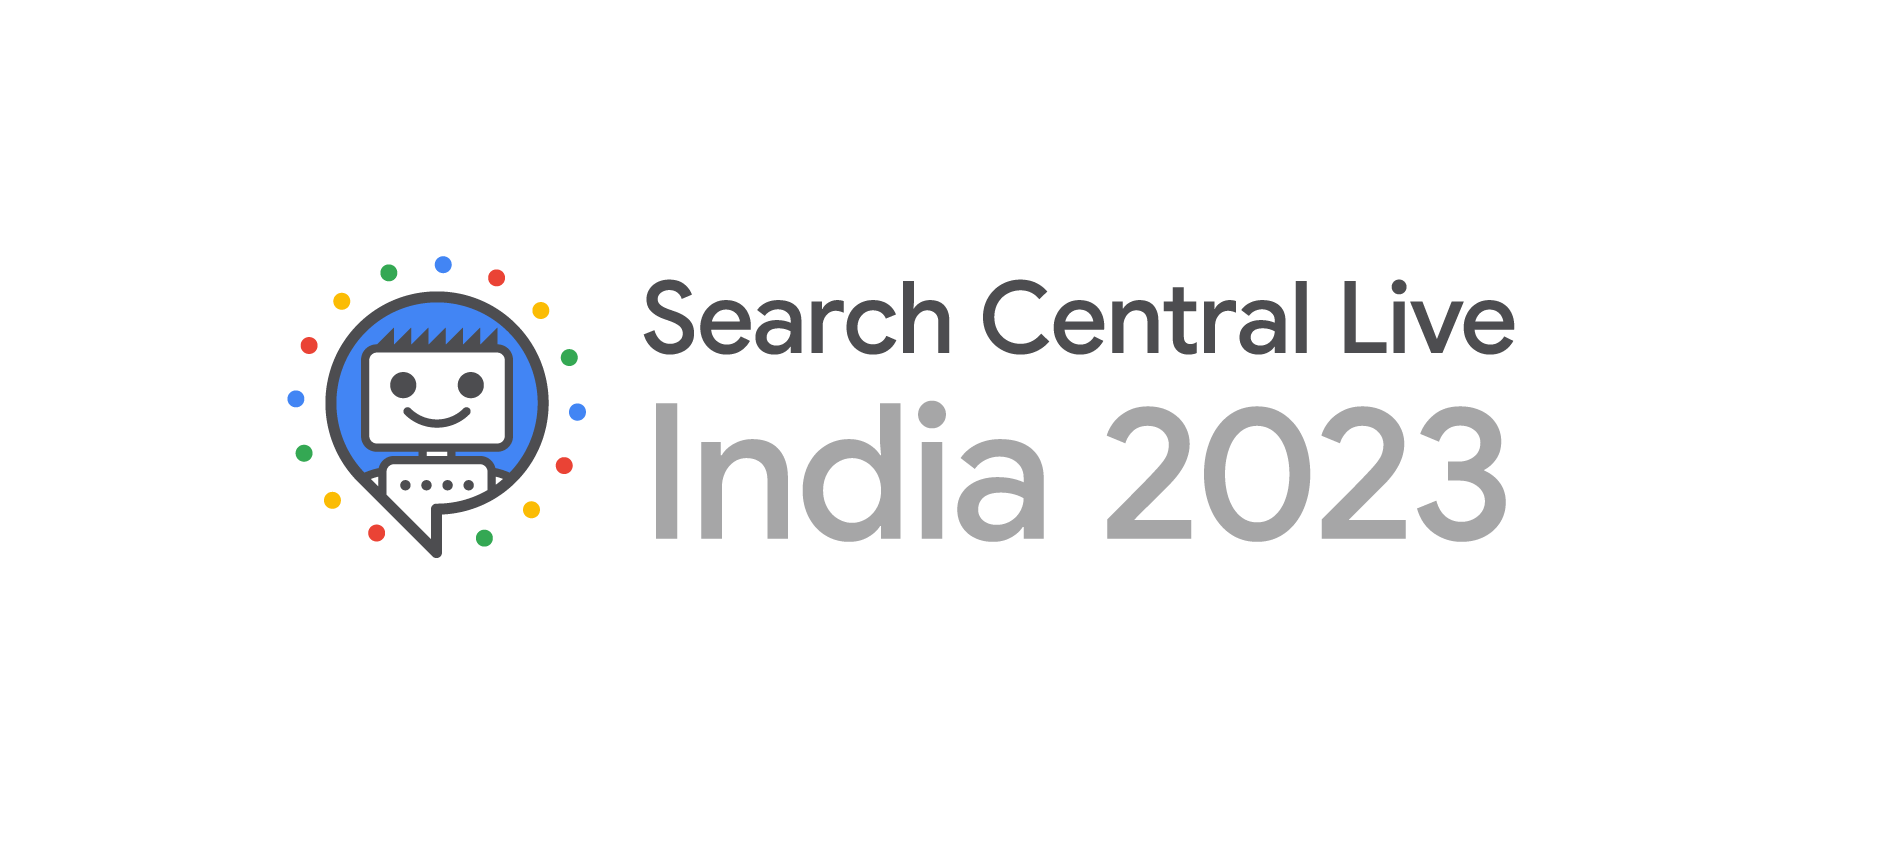 Search Central Live is coming to India  |  Google Search Central Blog  |  Google for Developers